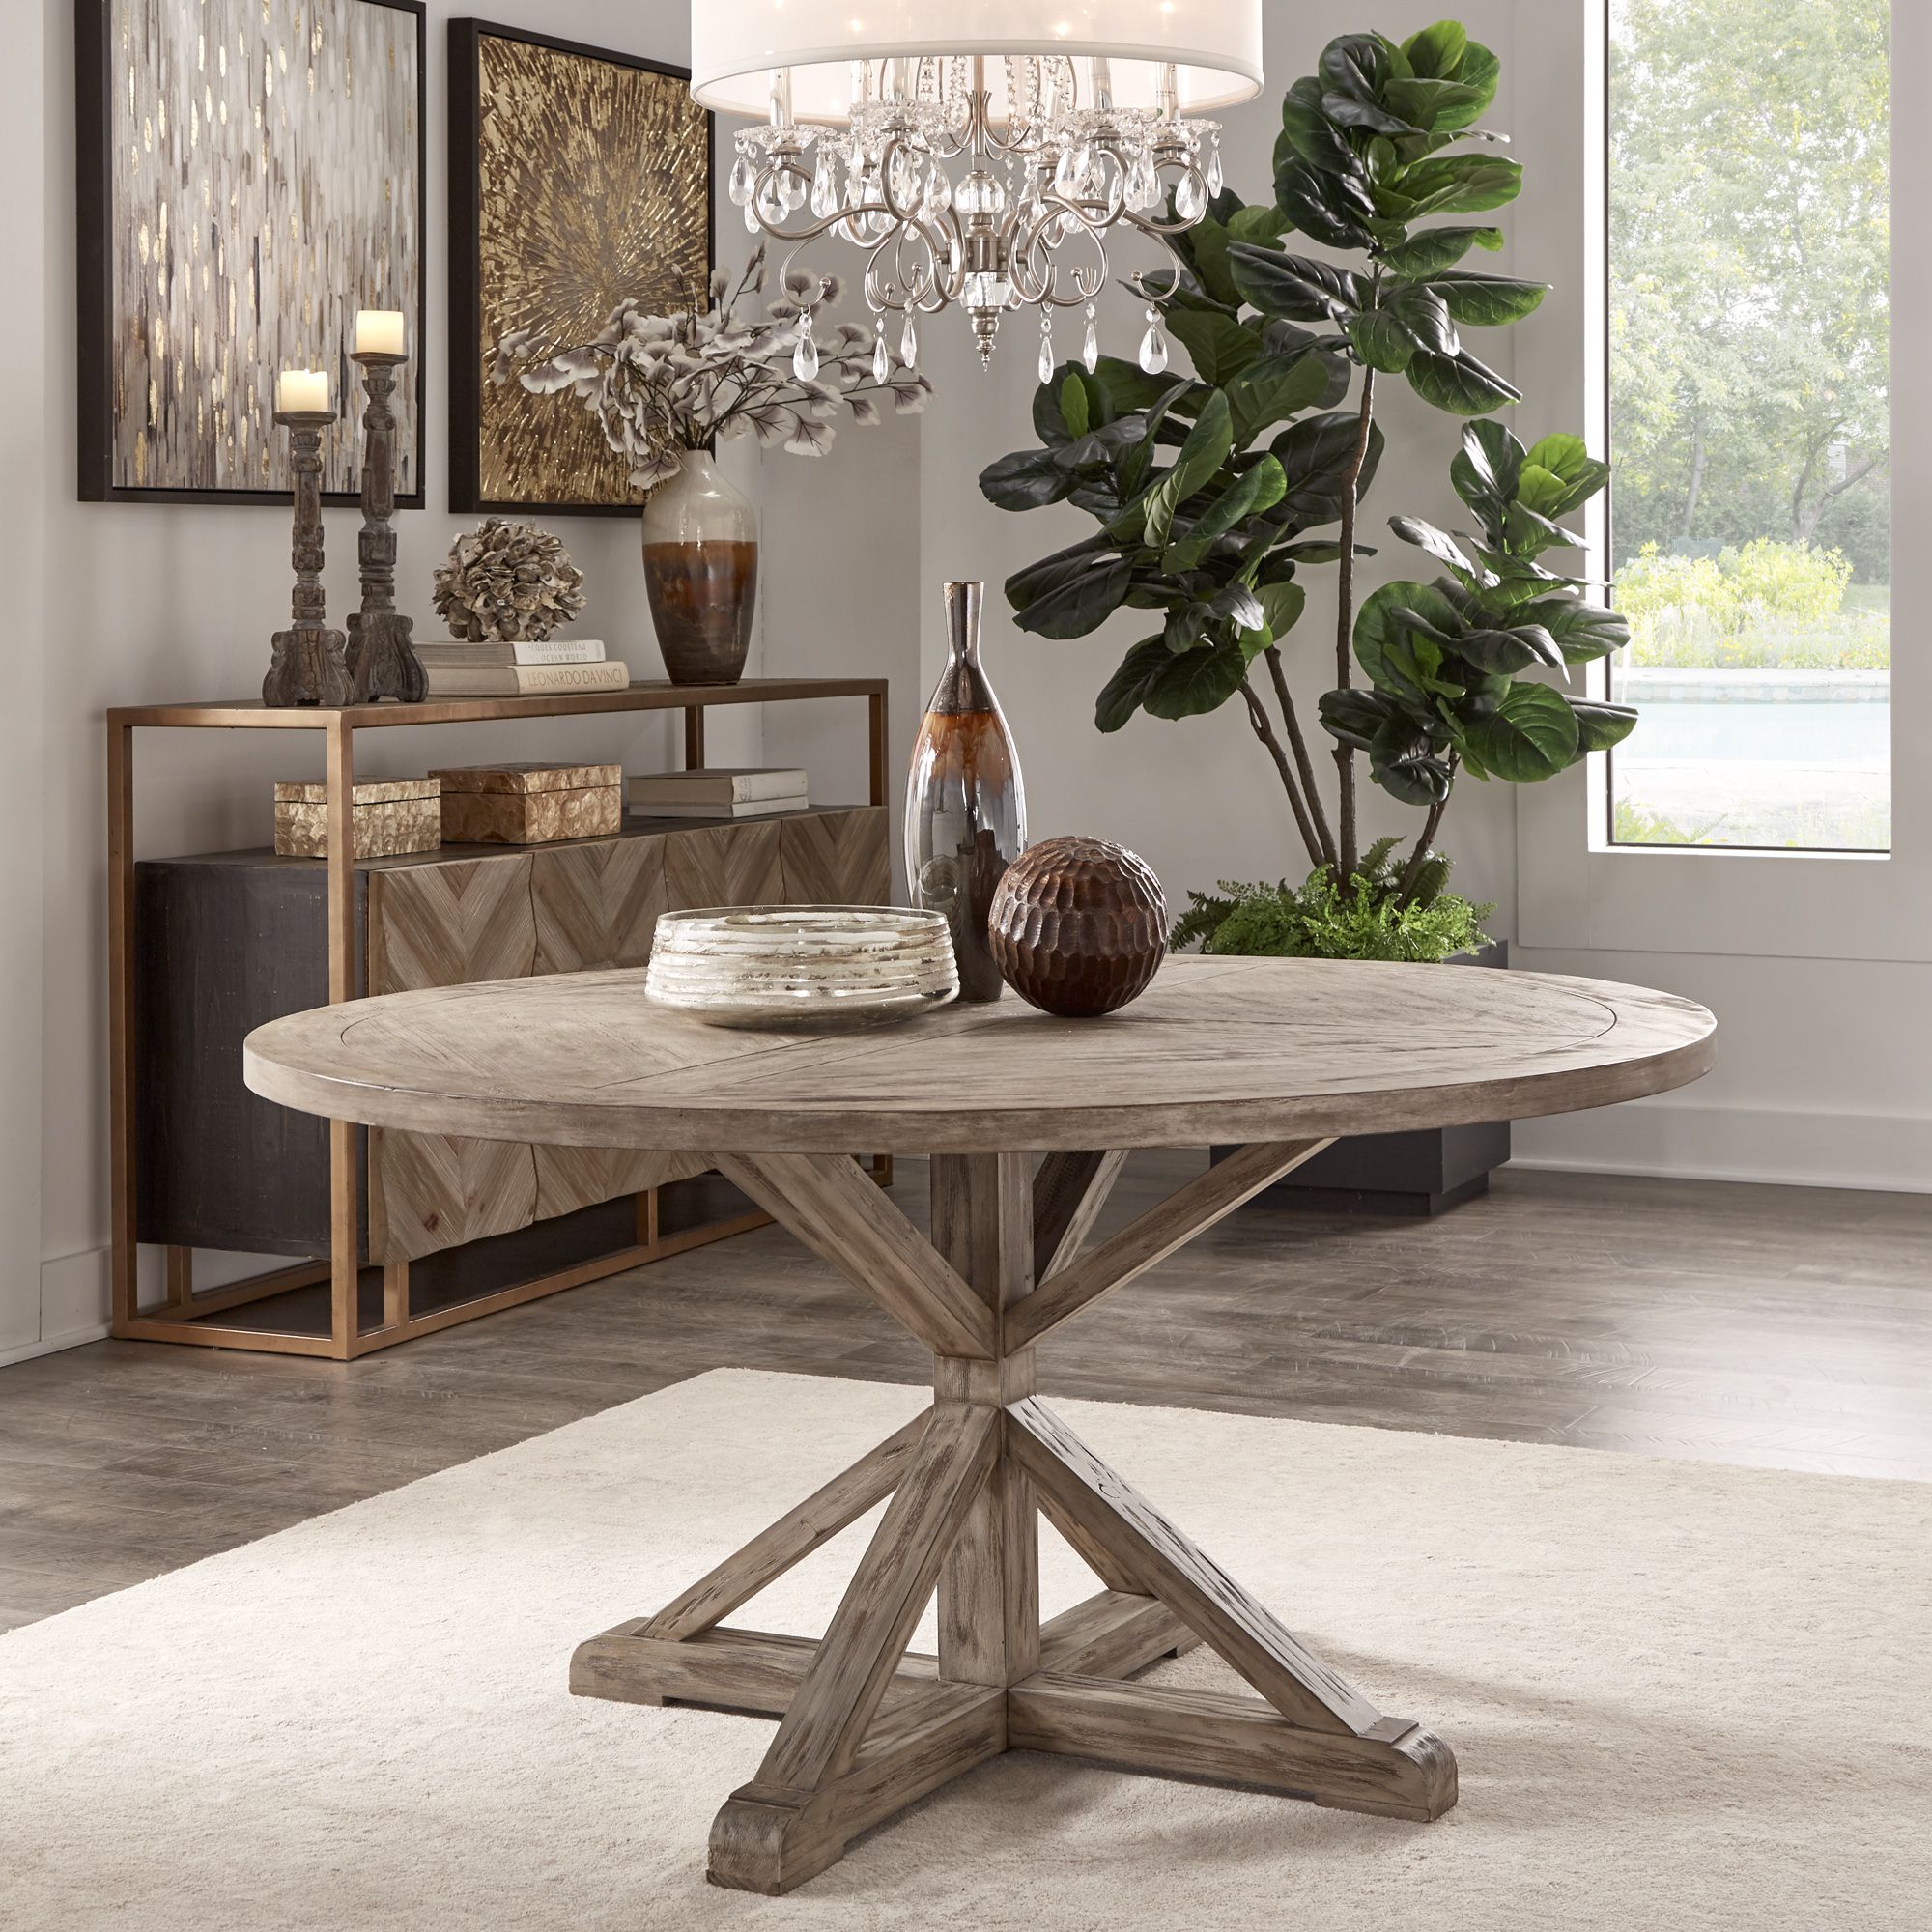 Rustic X-Base Round Pine Wood Dining Table